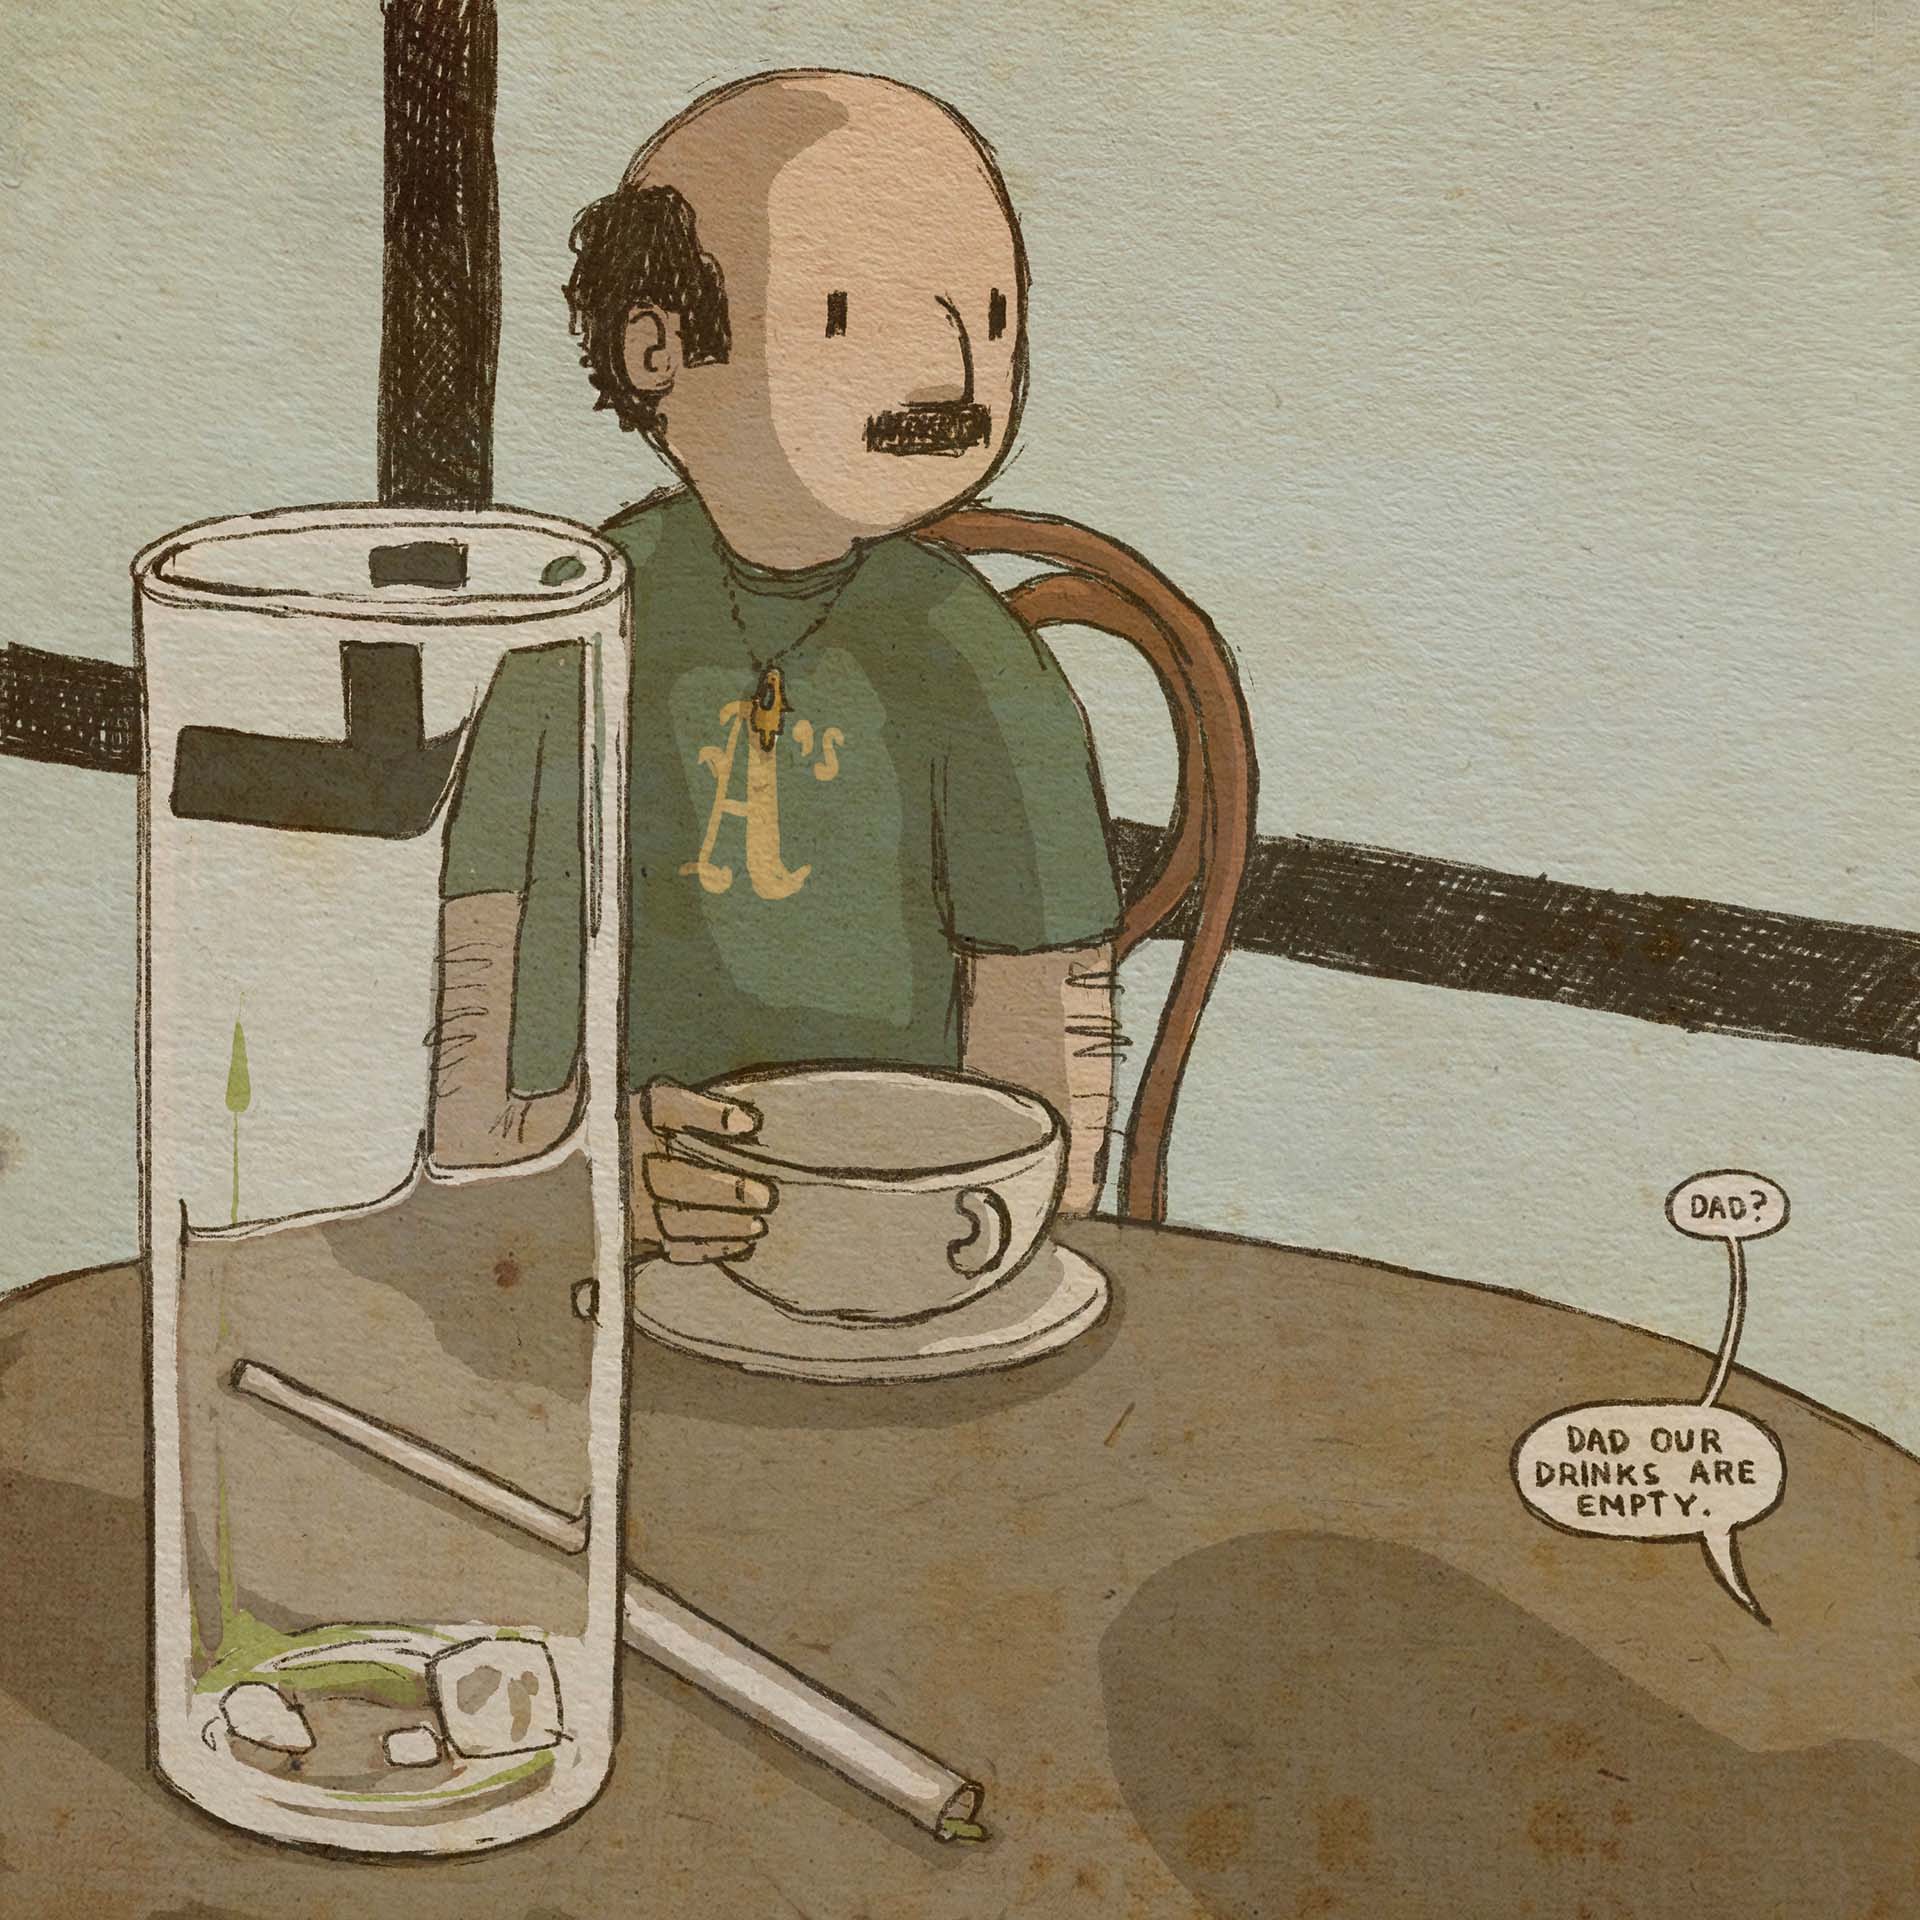 Back in the present day, the dad stares off into space. Both his coffee cup and the soda glass are now empty. Just outside the panel, the daughter says, "Dad?" "Dad, our drinks are empty."